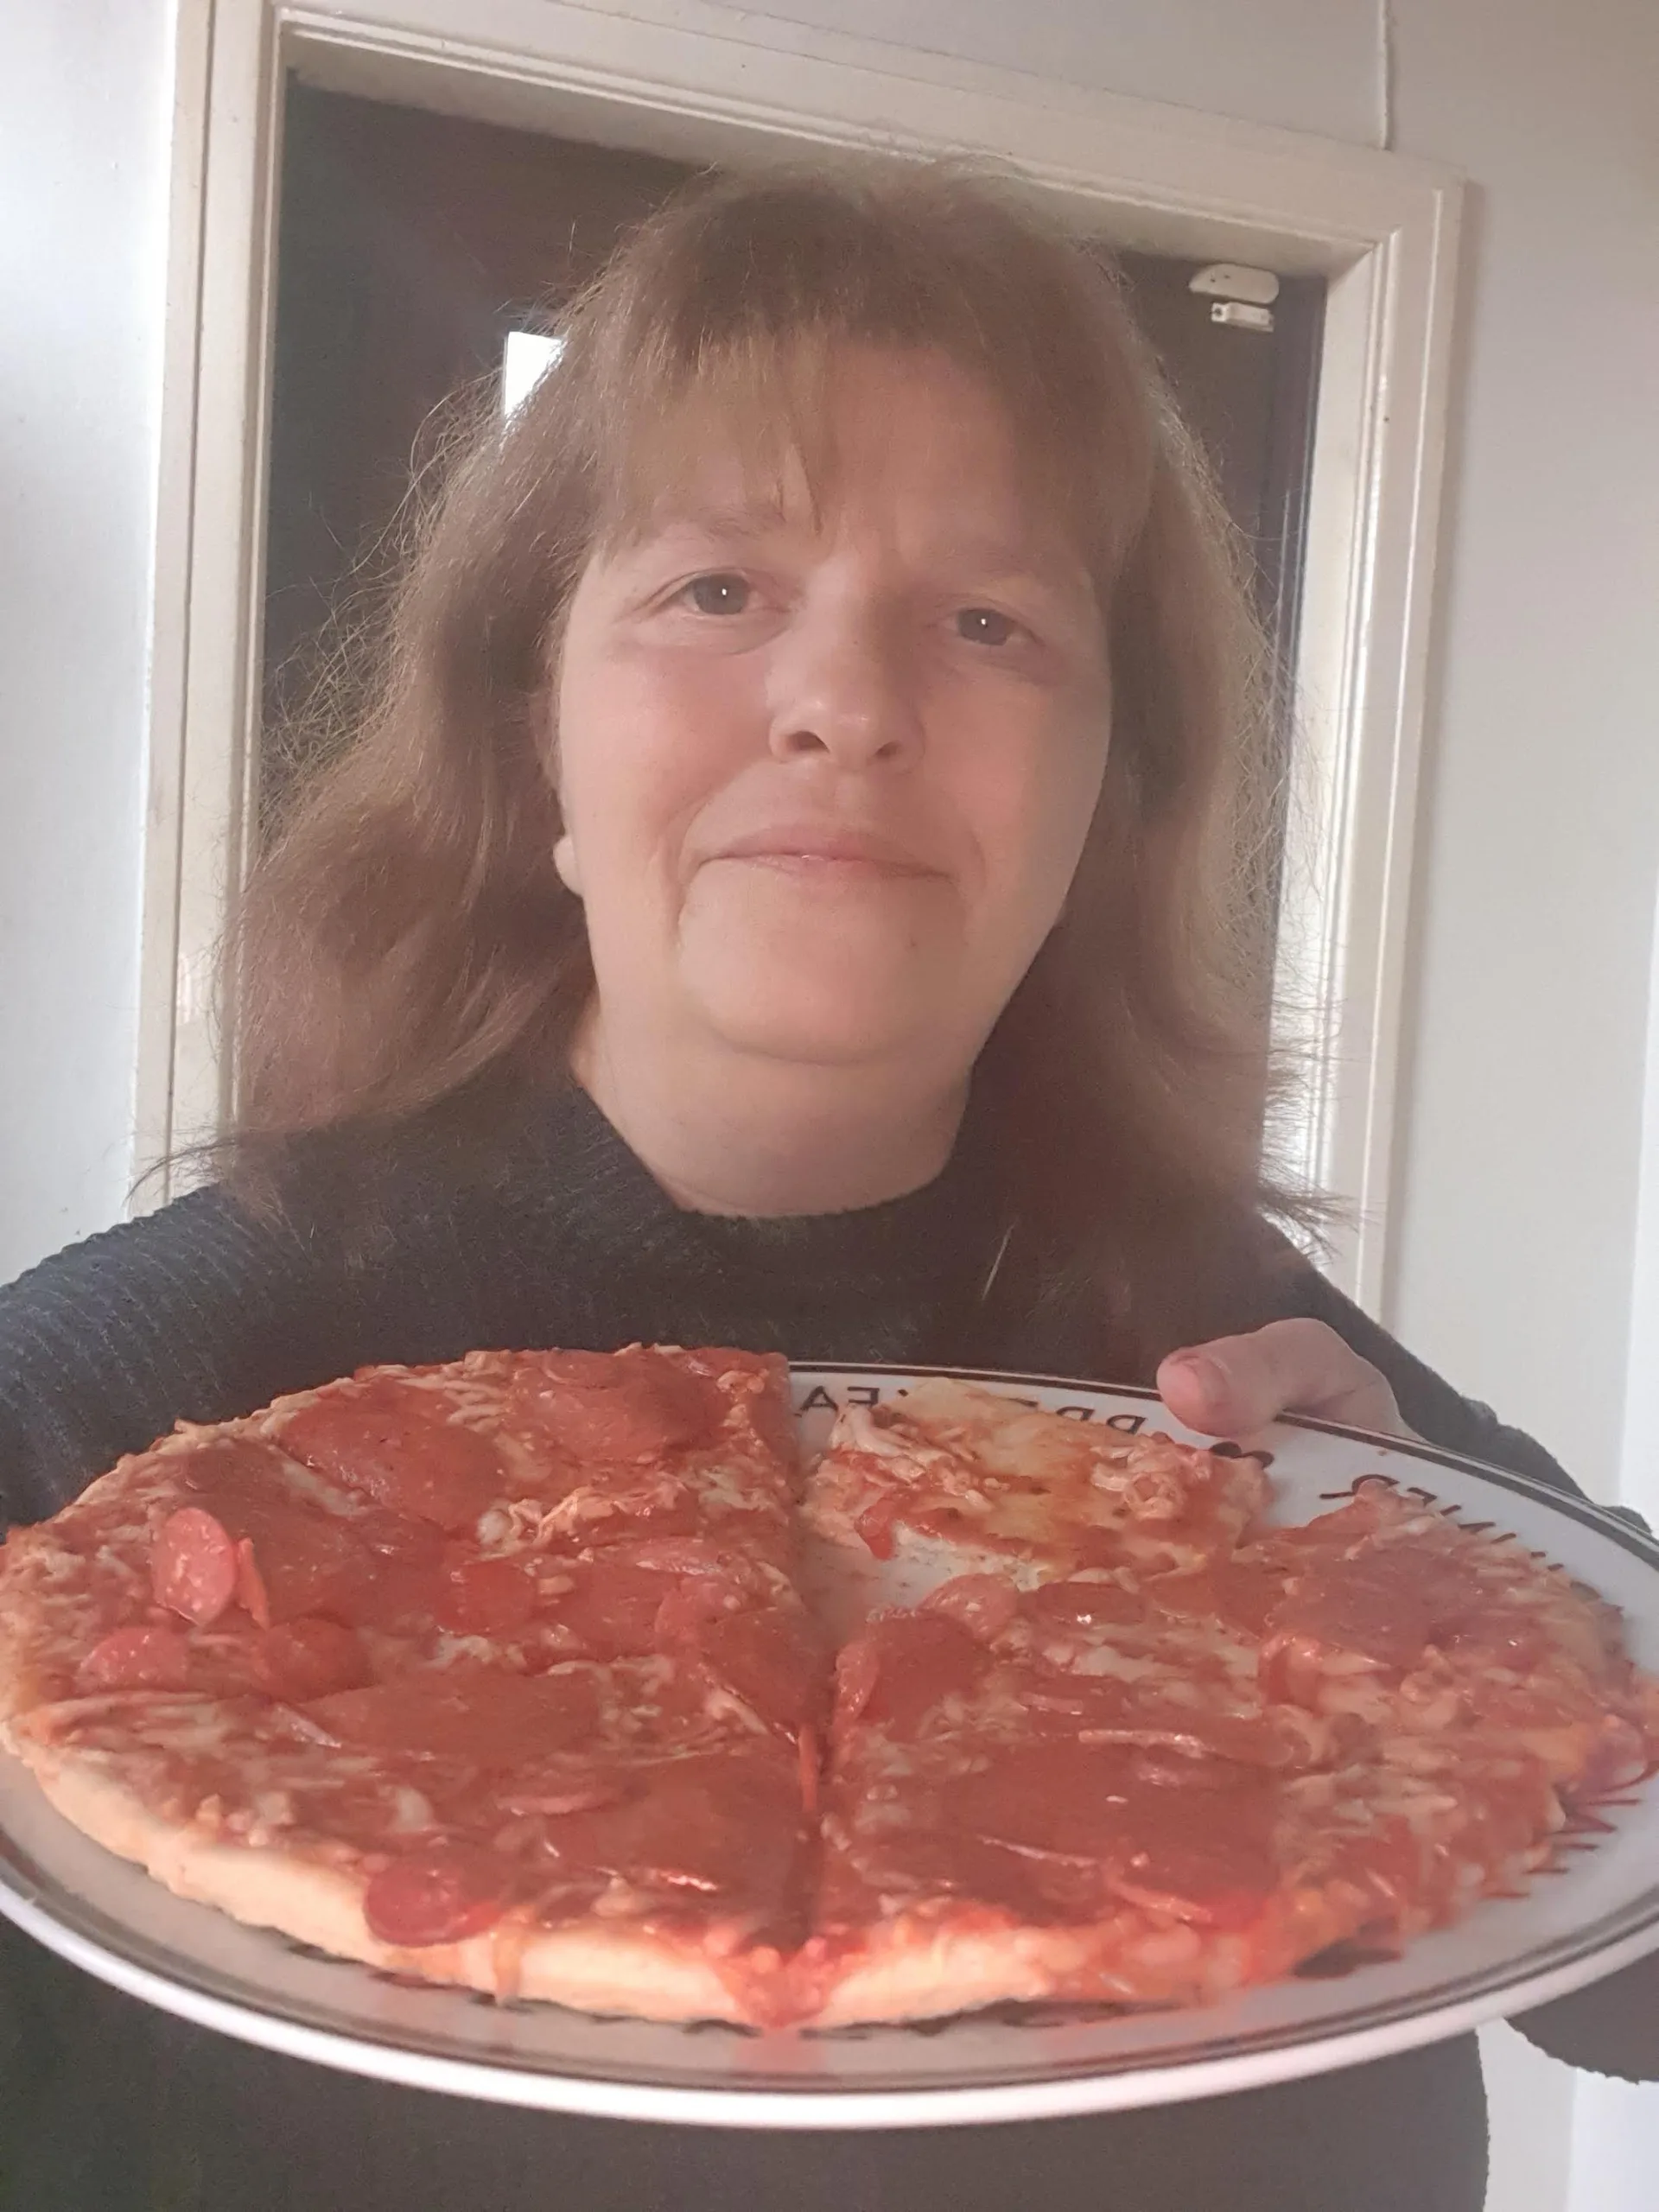 Janette is shown smiling while holding up a meat feast pizza.